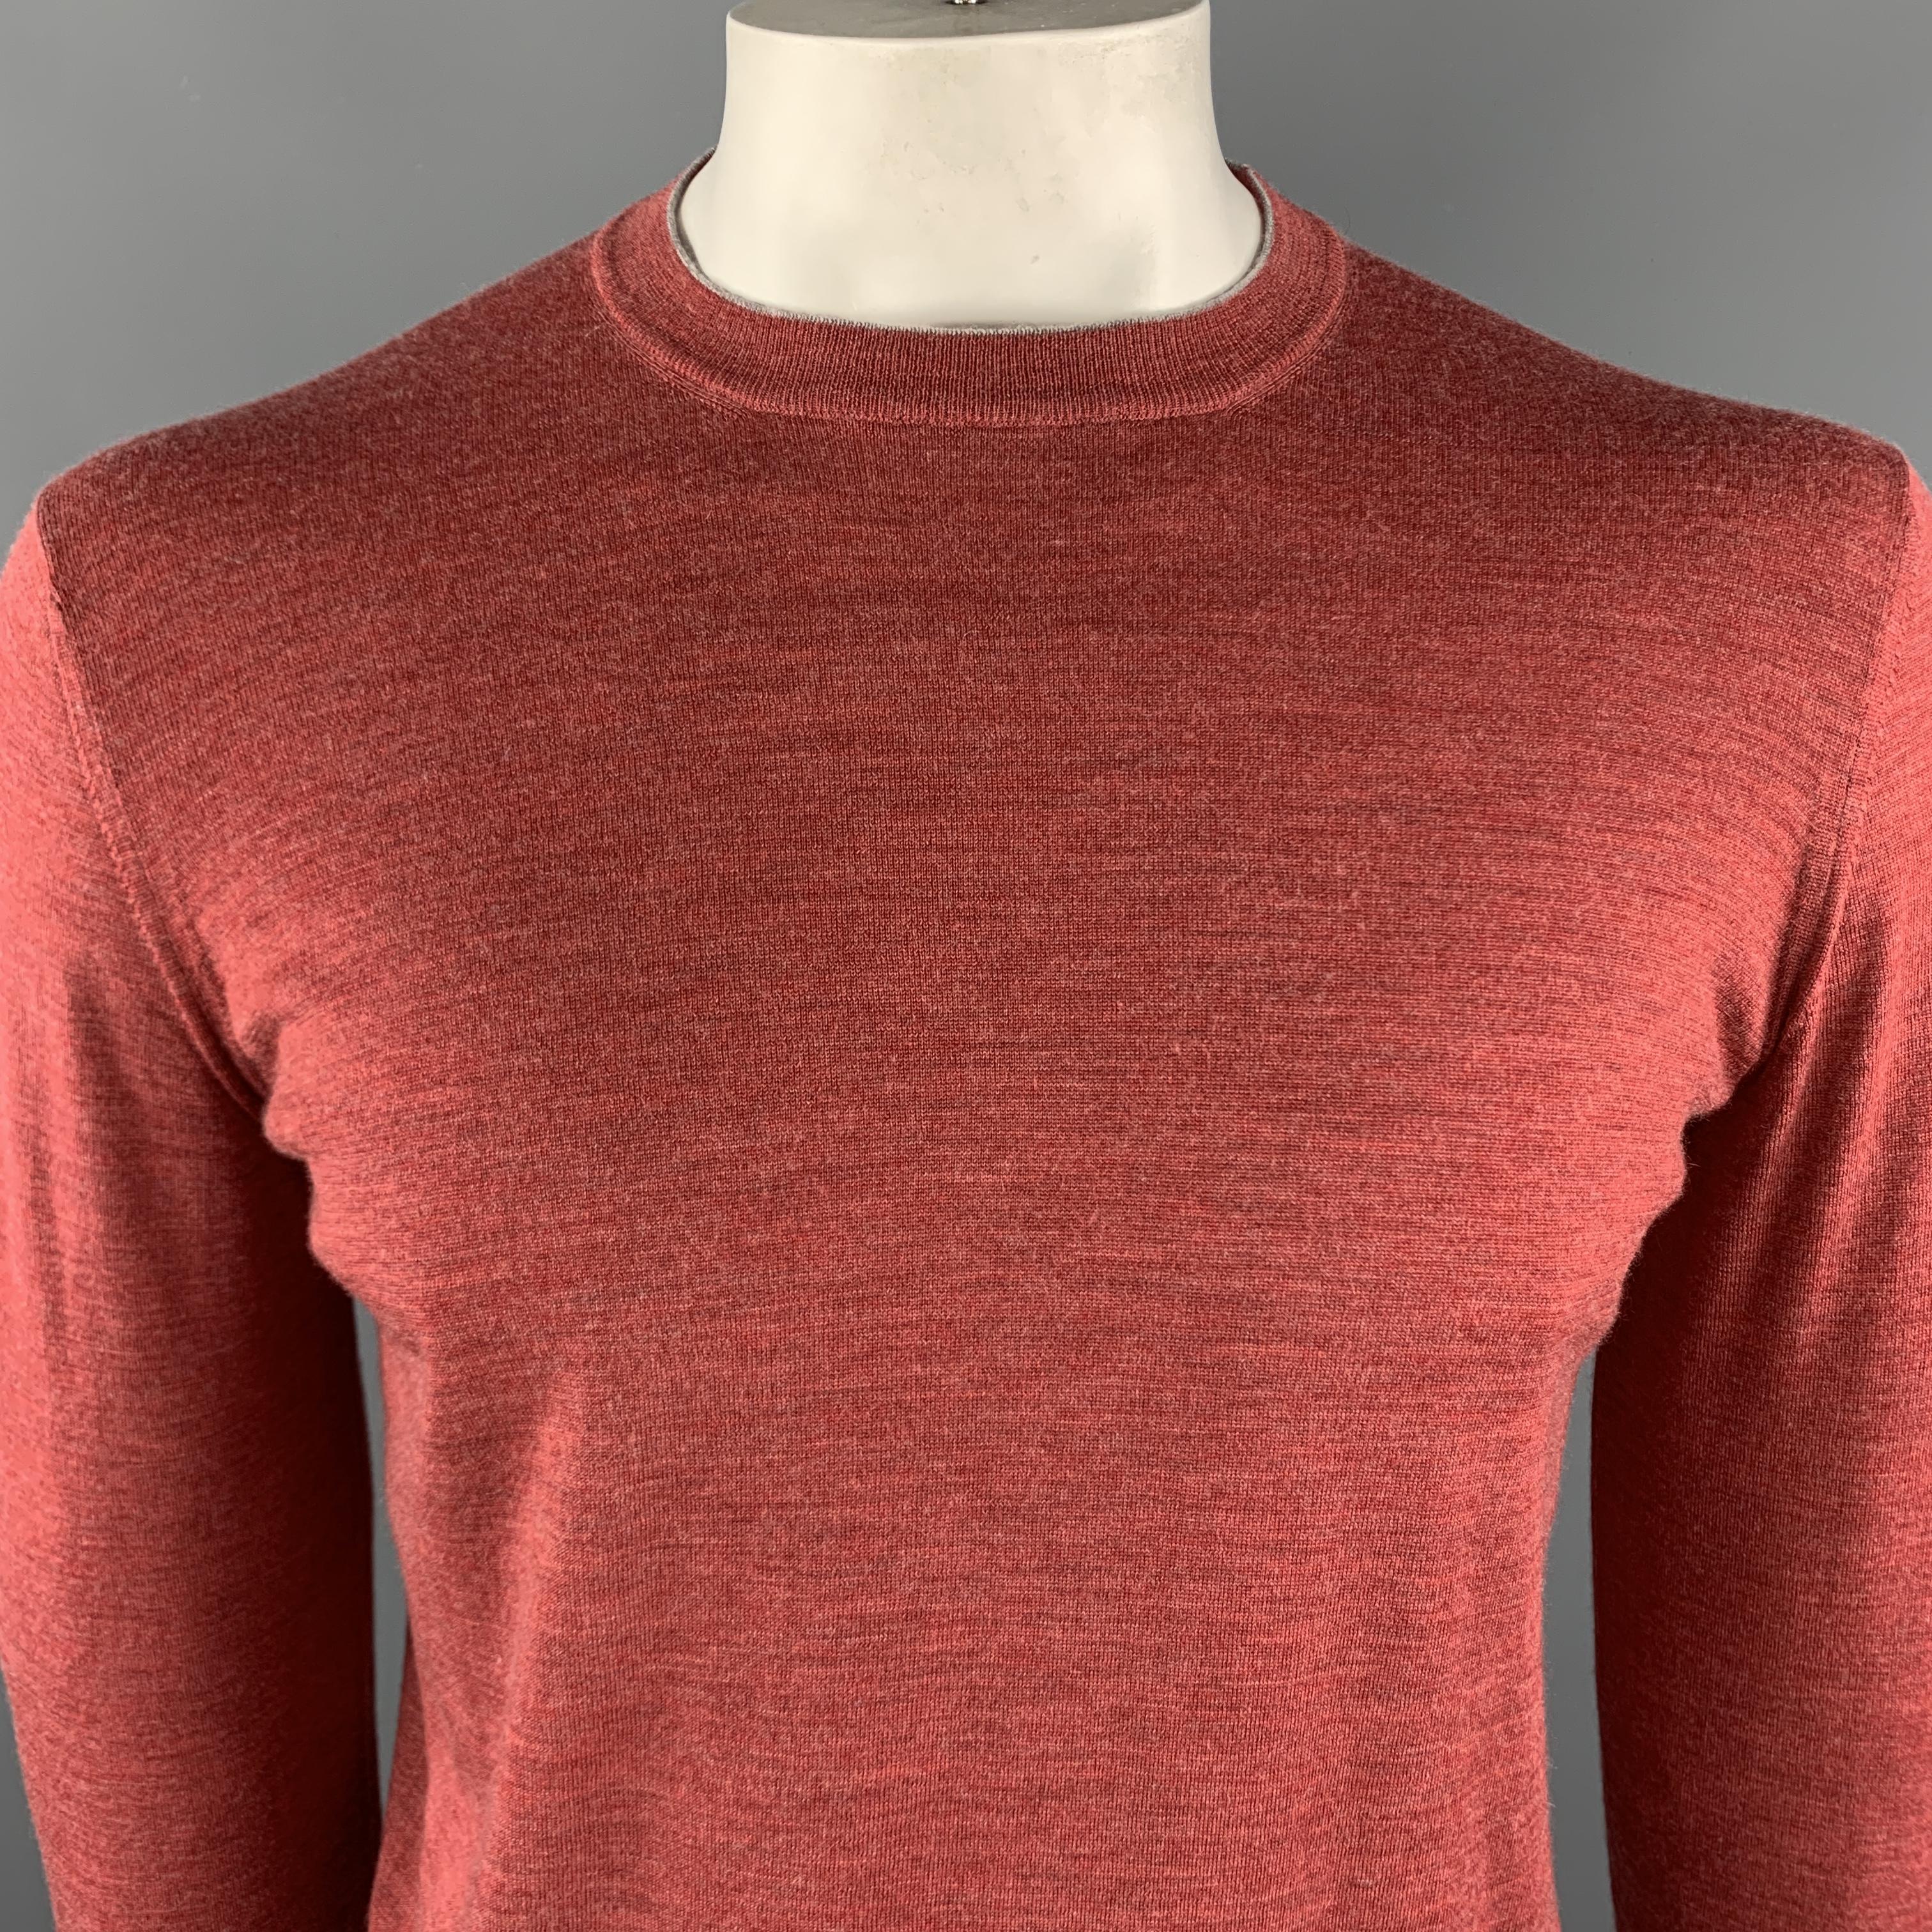 BRUNELLO CUCINELLI Pullover Sweater comes in a brick tone in a knitted wool cashmere material, with a crewneck, and ribbed cuffs and hem. Made in Italy.

Excelent Pre-Owned Condition.
Marked: IT 50

Measurements:

Shoulder: 17 in. 
Chest: 42 in.